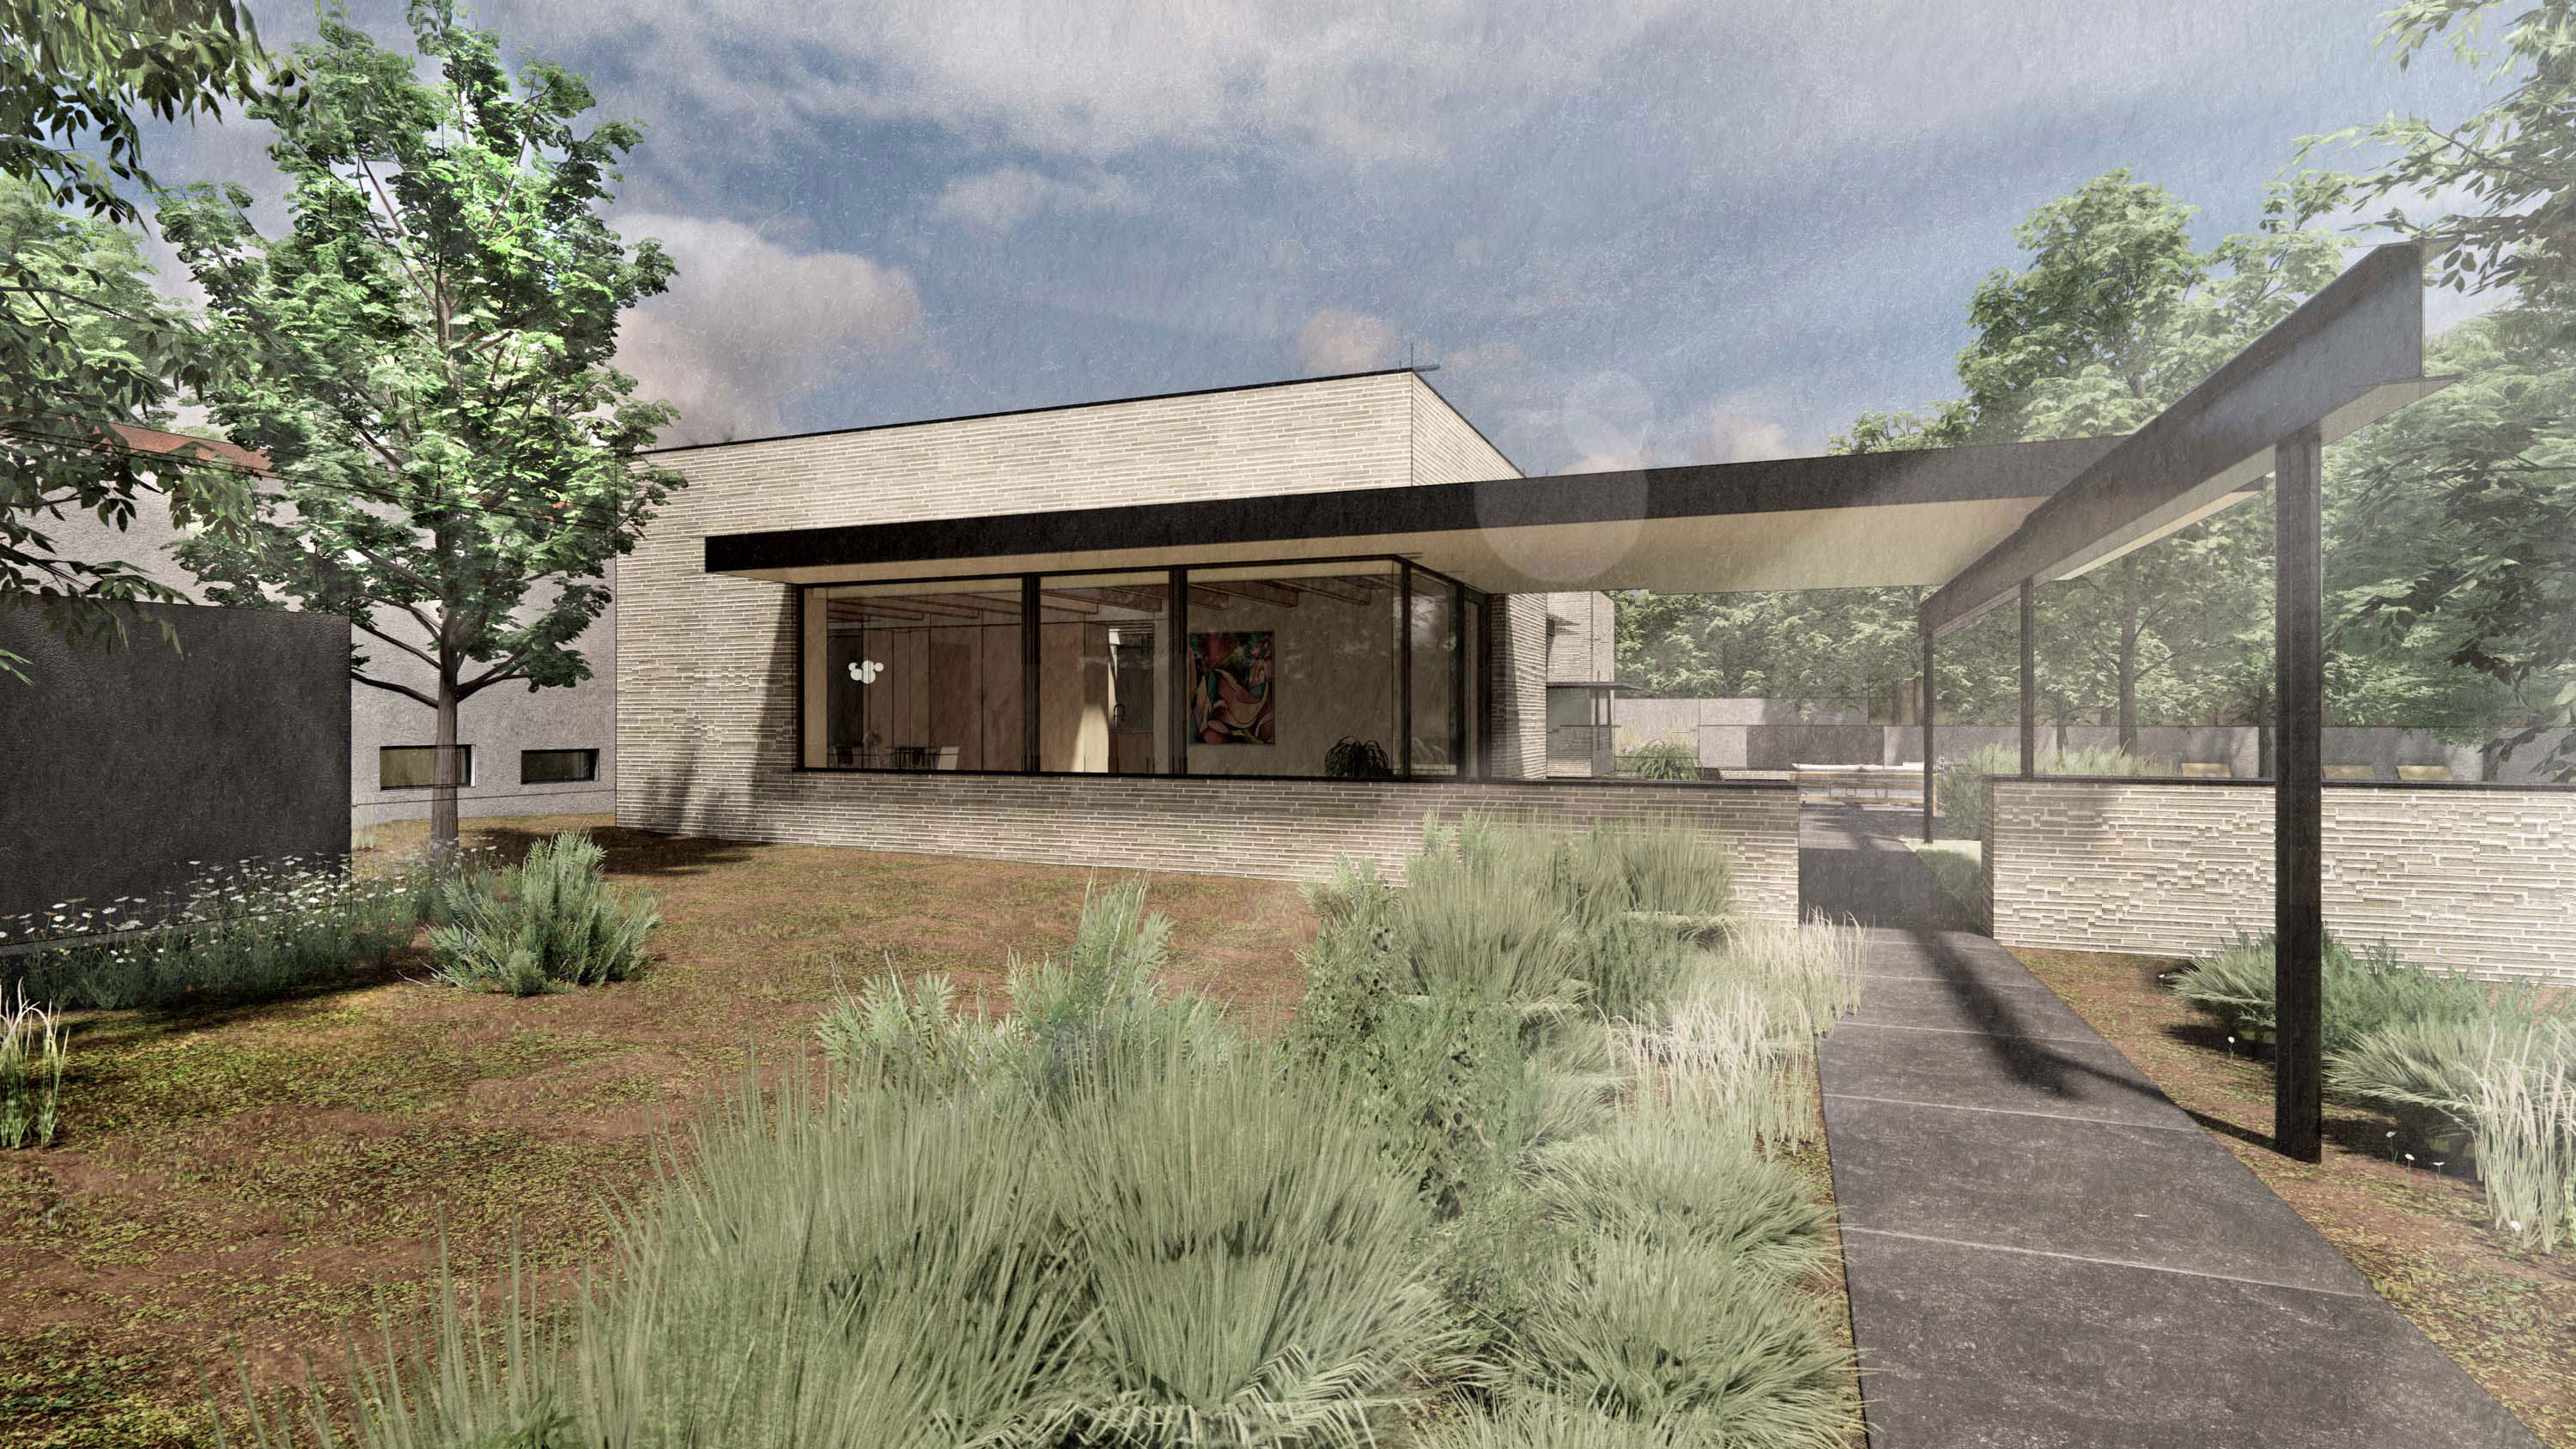 Exterior rendering of the Tesuque House by Specht Novak Architects, featuring the fusion of historical precedent and innovation through low-slung industrial composition echoing the contours of the natural terrain.